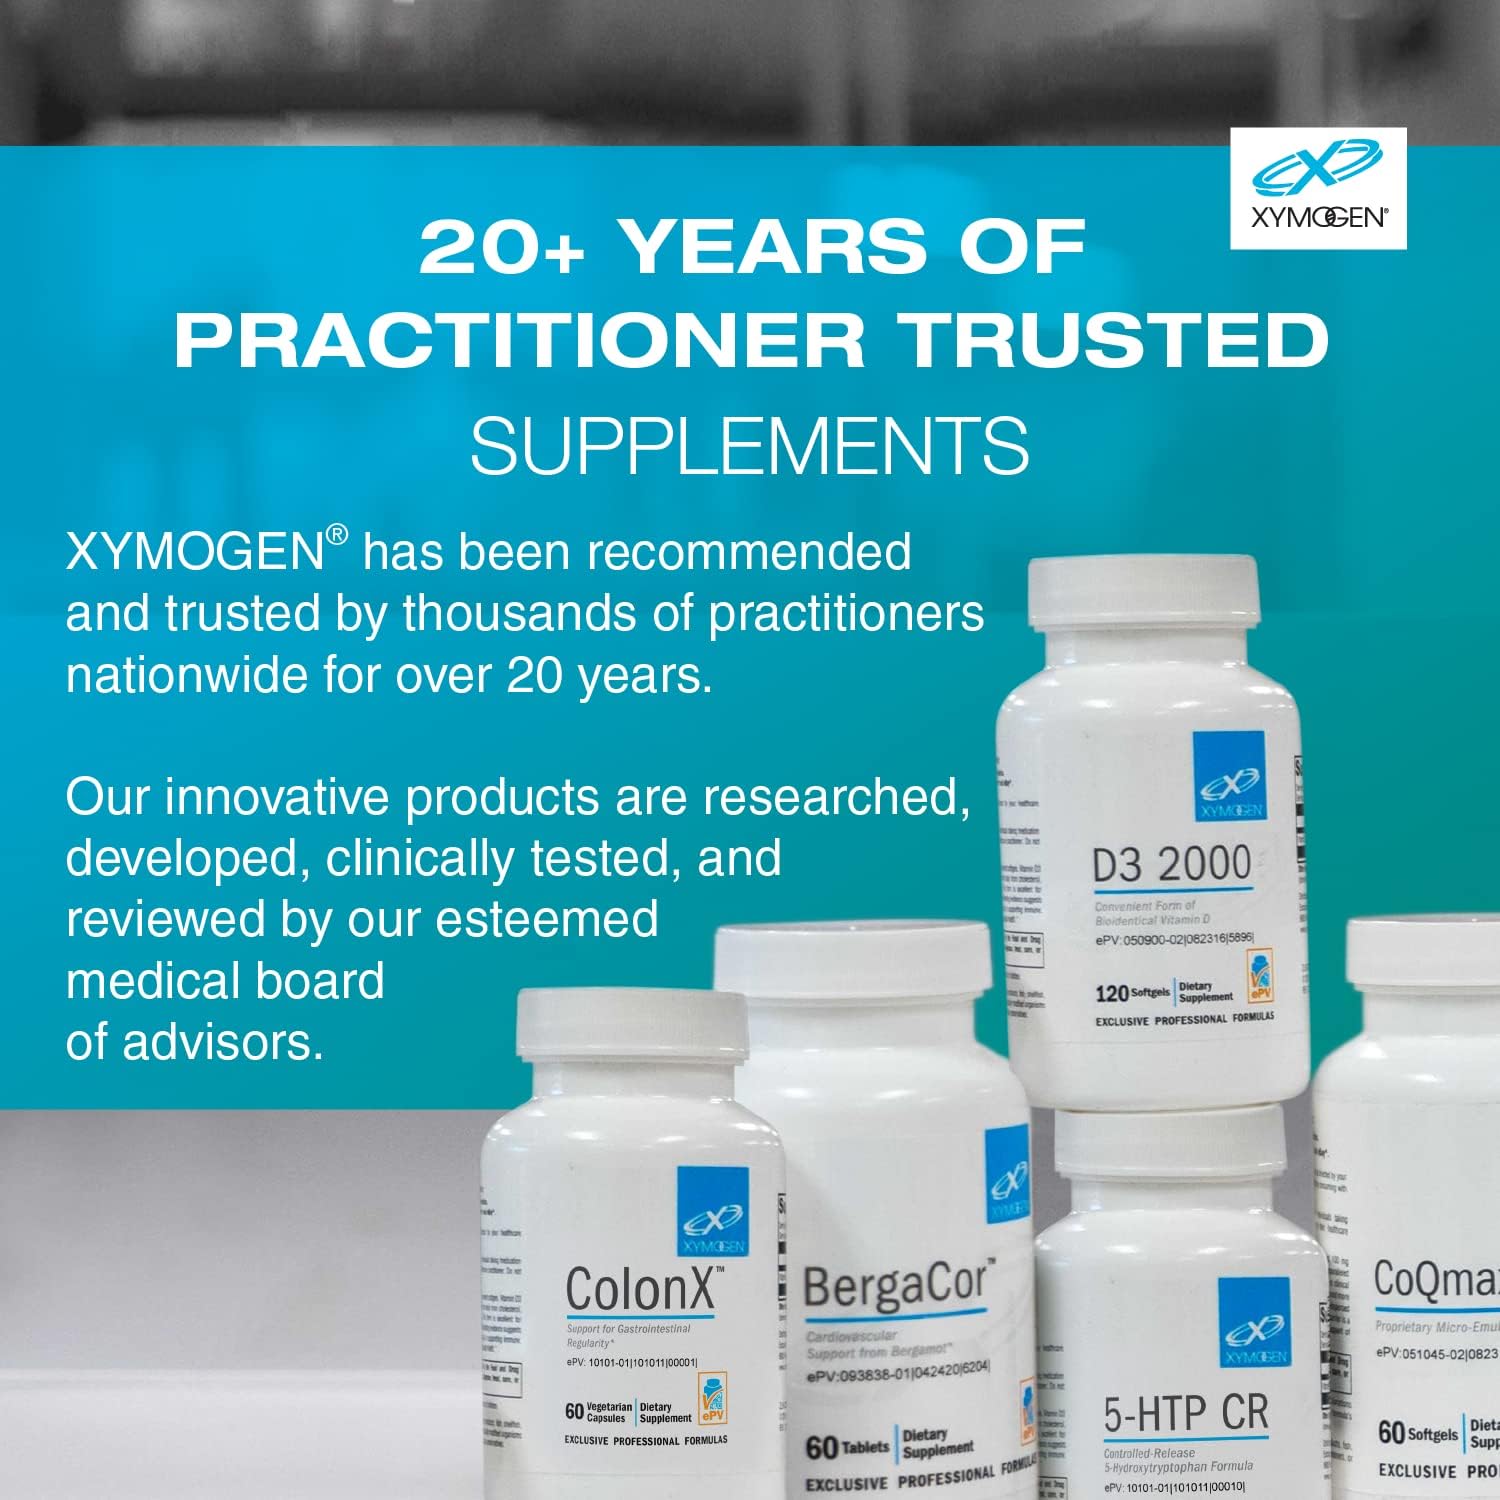 XYMOGEN Viragraphis - Powerful Short-Term Immune Health Support with A